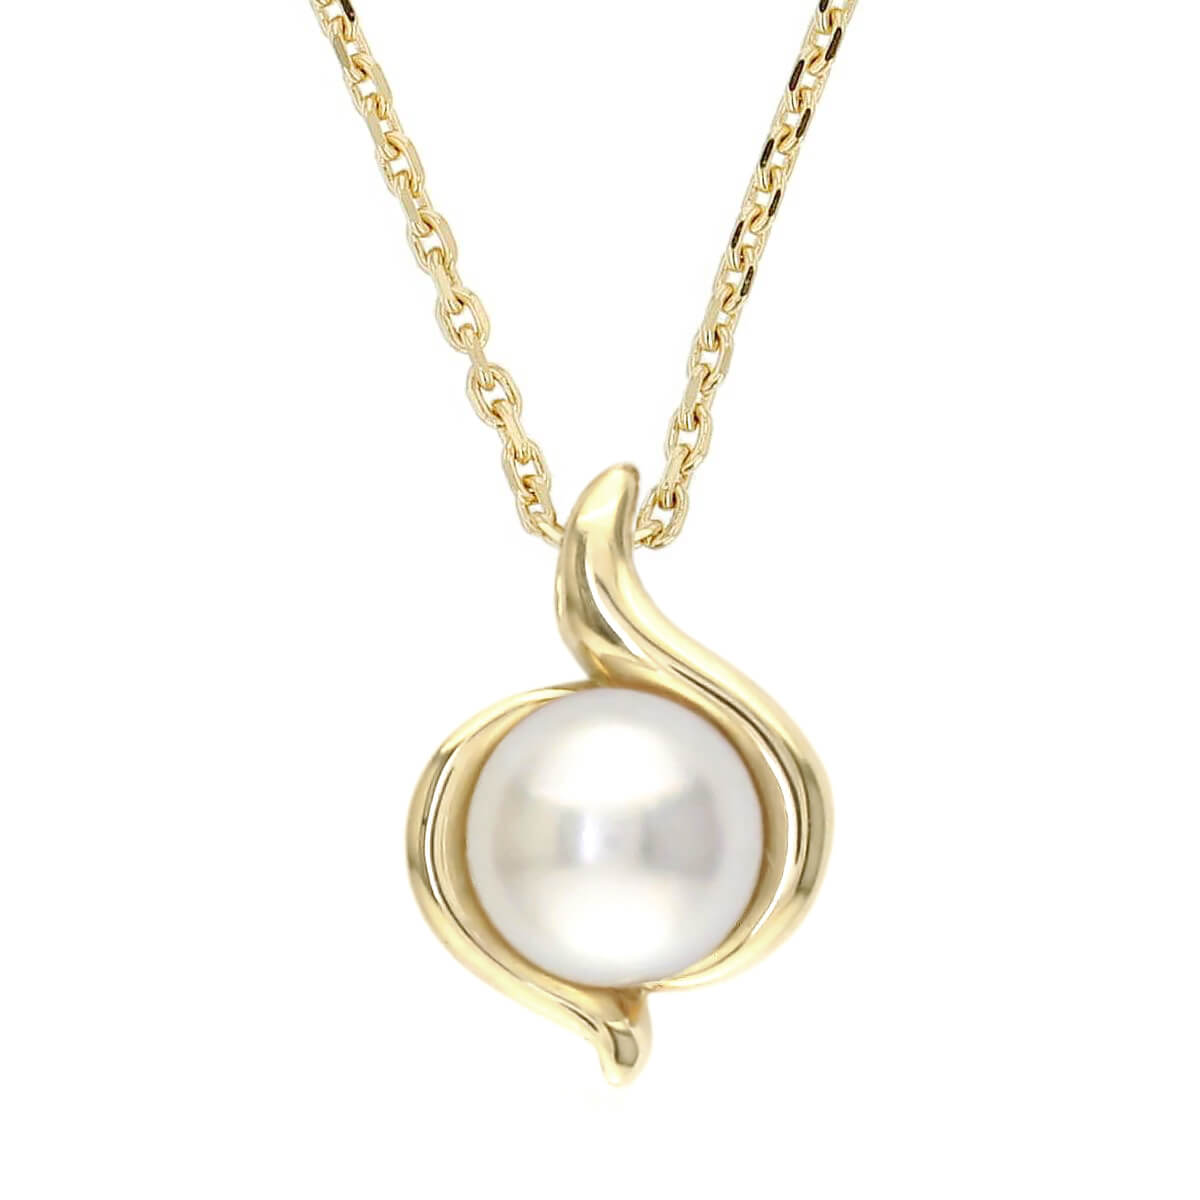 6.5mm Akoya cultured saltwater pearl 18ct yellow gold pendant with chain,18kt, designer, handmade by Faller, Derry/ Londonderry, hand crafted, precious jewellery, jewelry